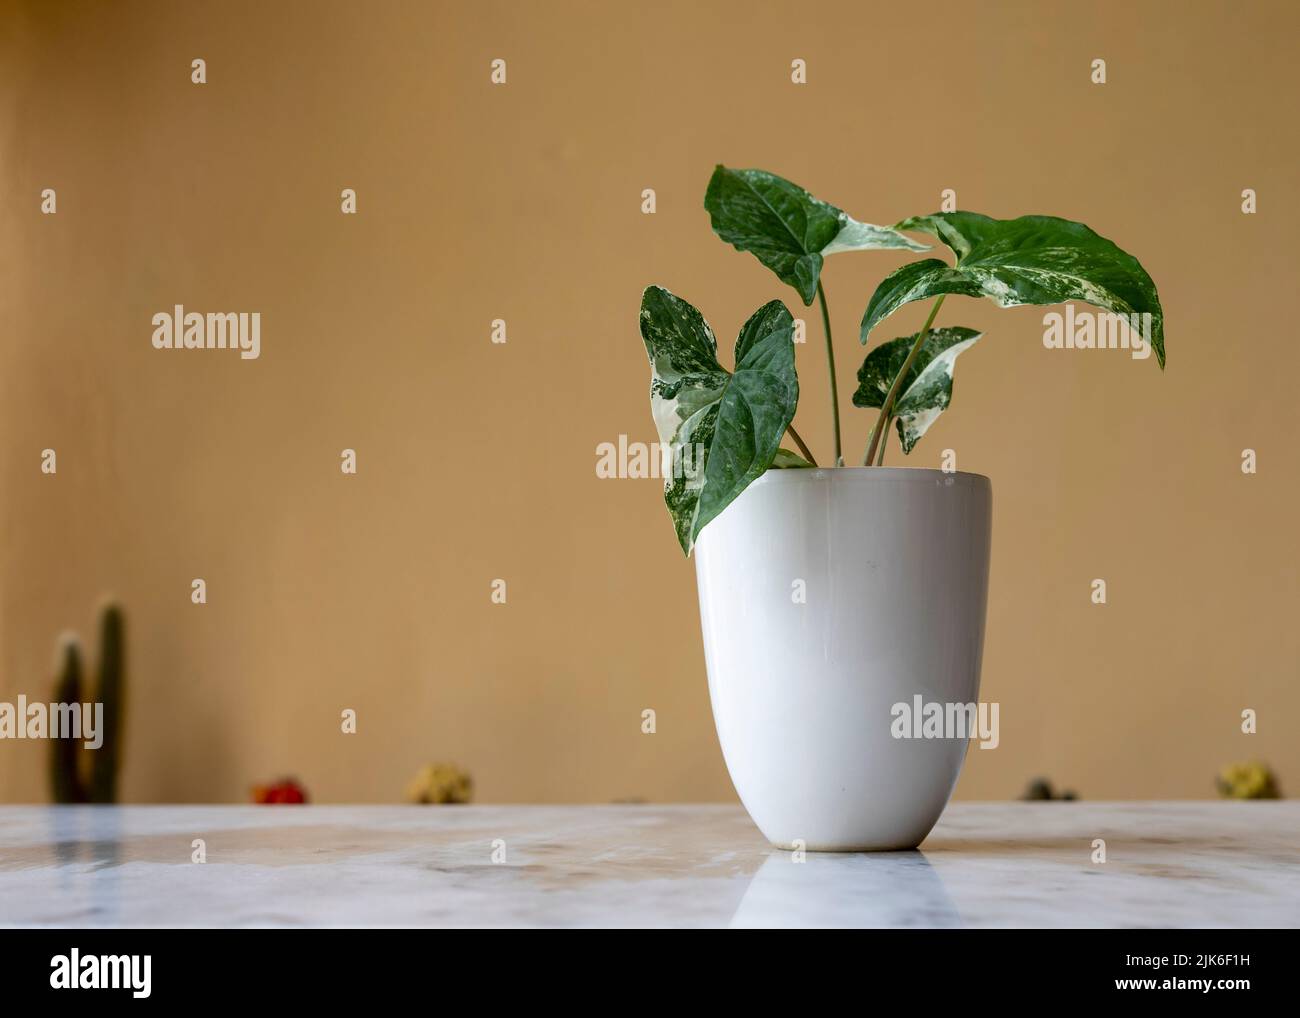 Beautiful syngonium albo plant in a white ceramic pot with copy space Stock Photo